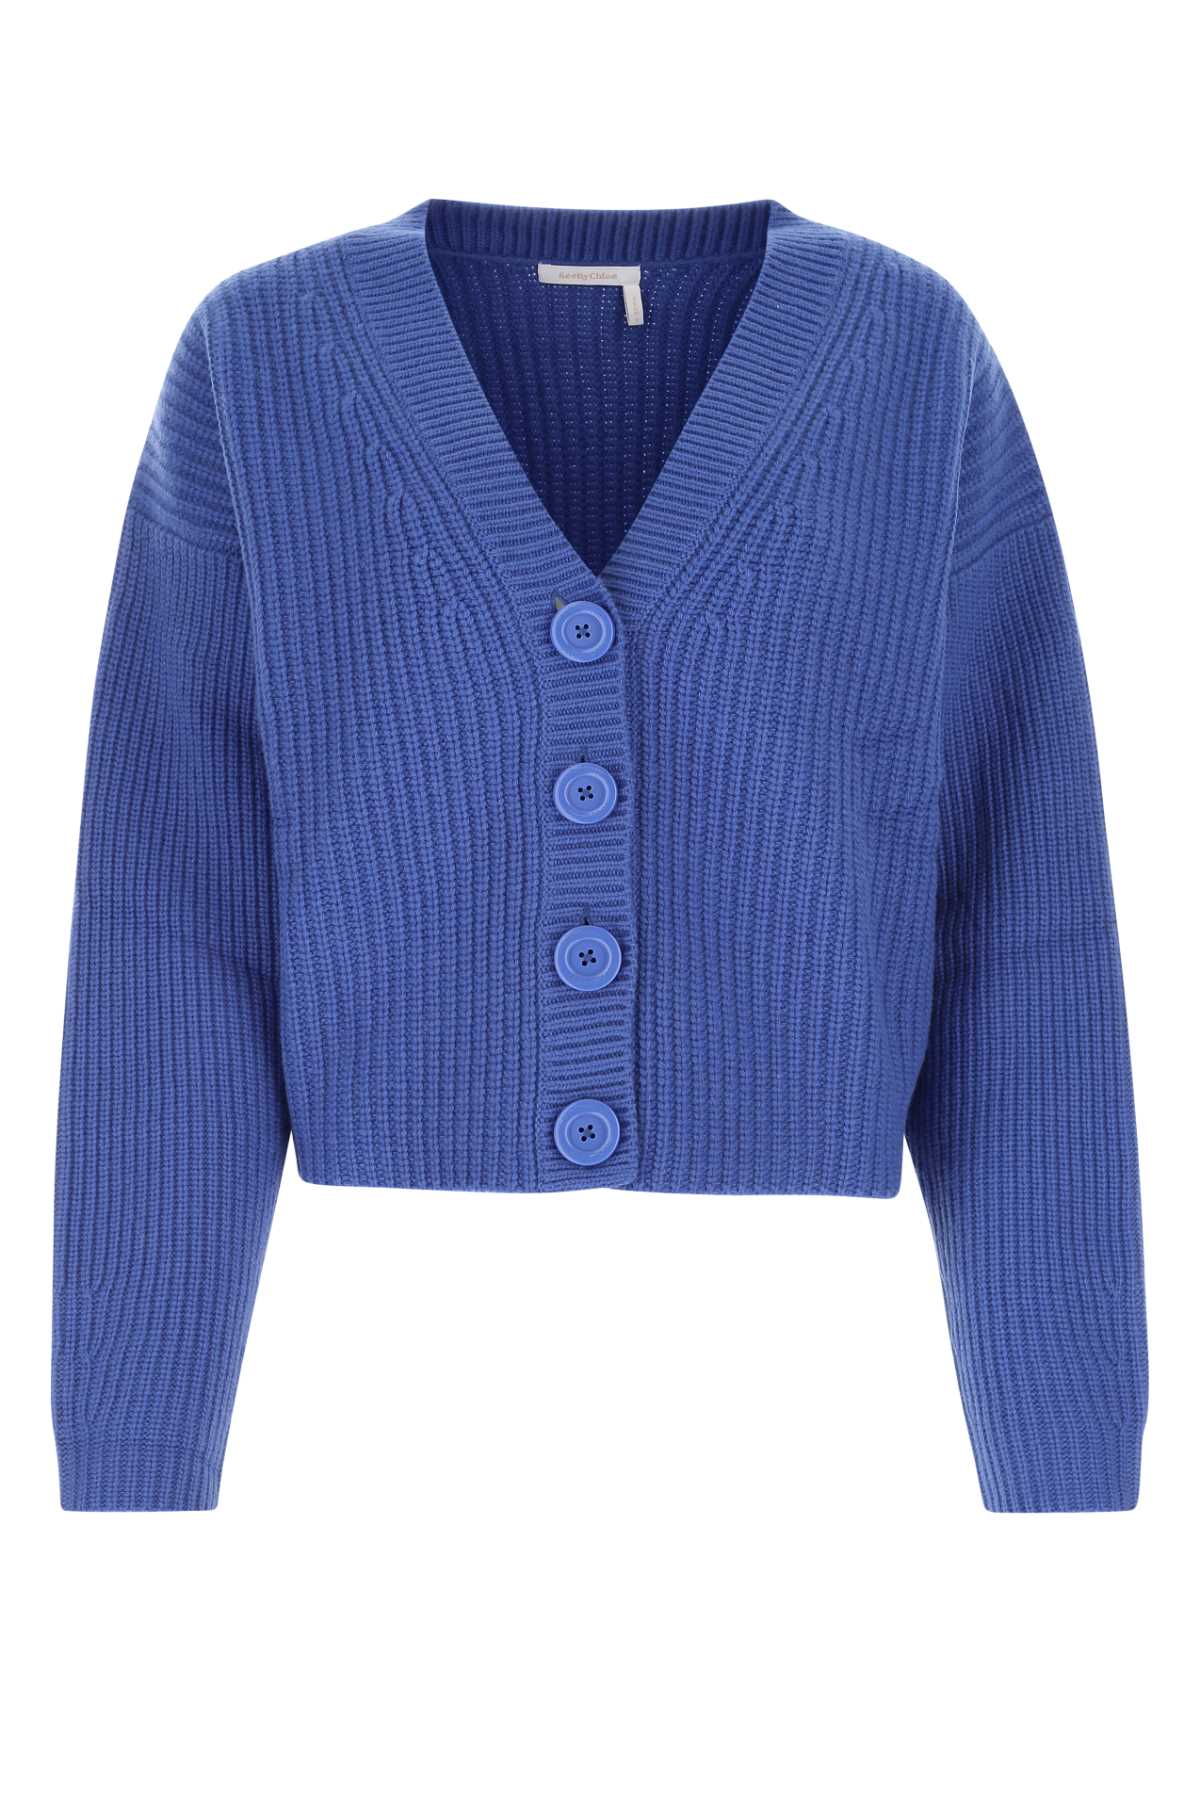 See by Chloé Cerulean Blue Wool Blend Oversize Cardigan